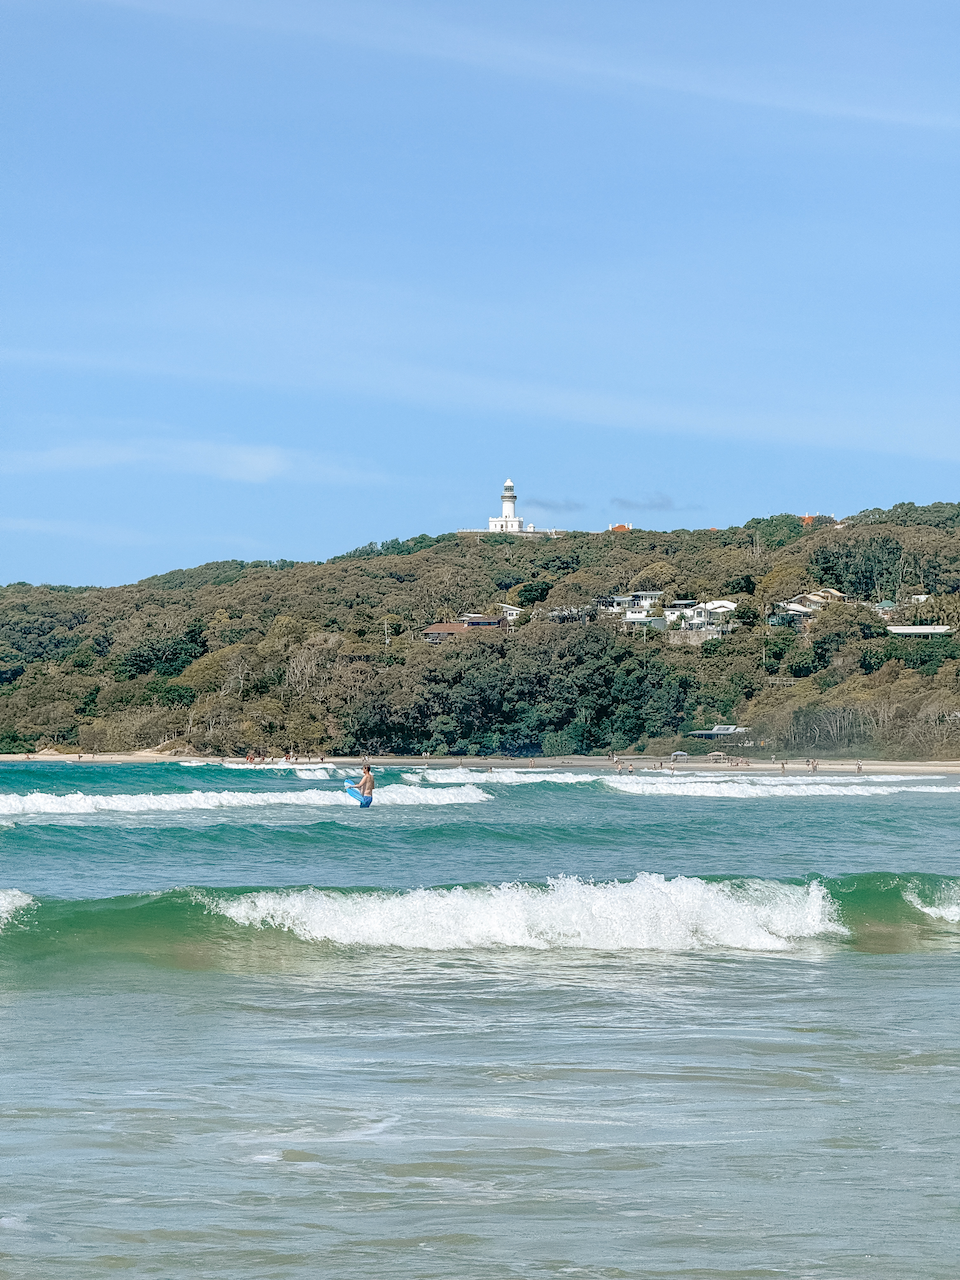 Cape Byron Lighthouse seen from the Main Beach - Byron Bay - New South Wales - Australia